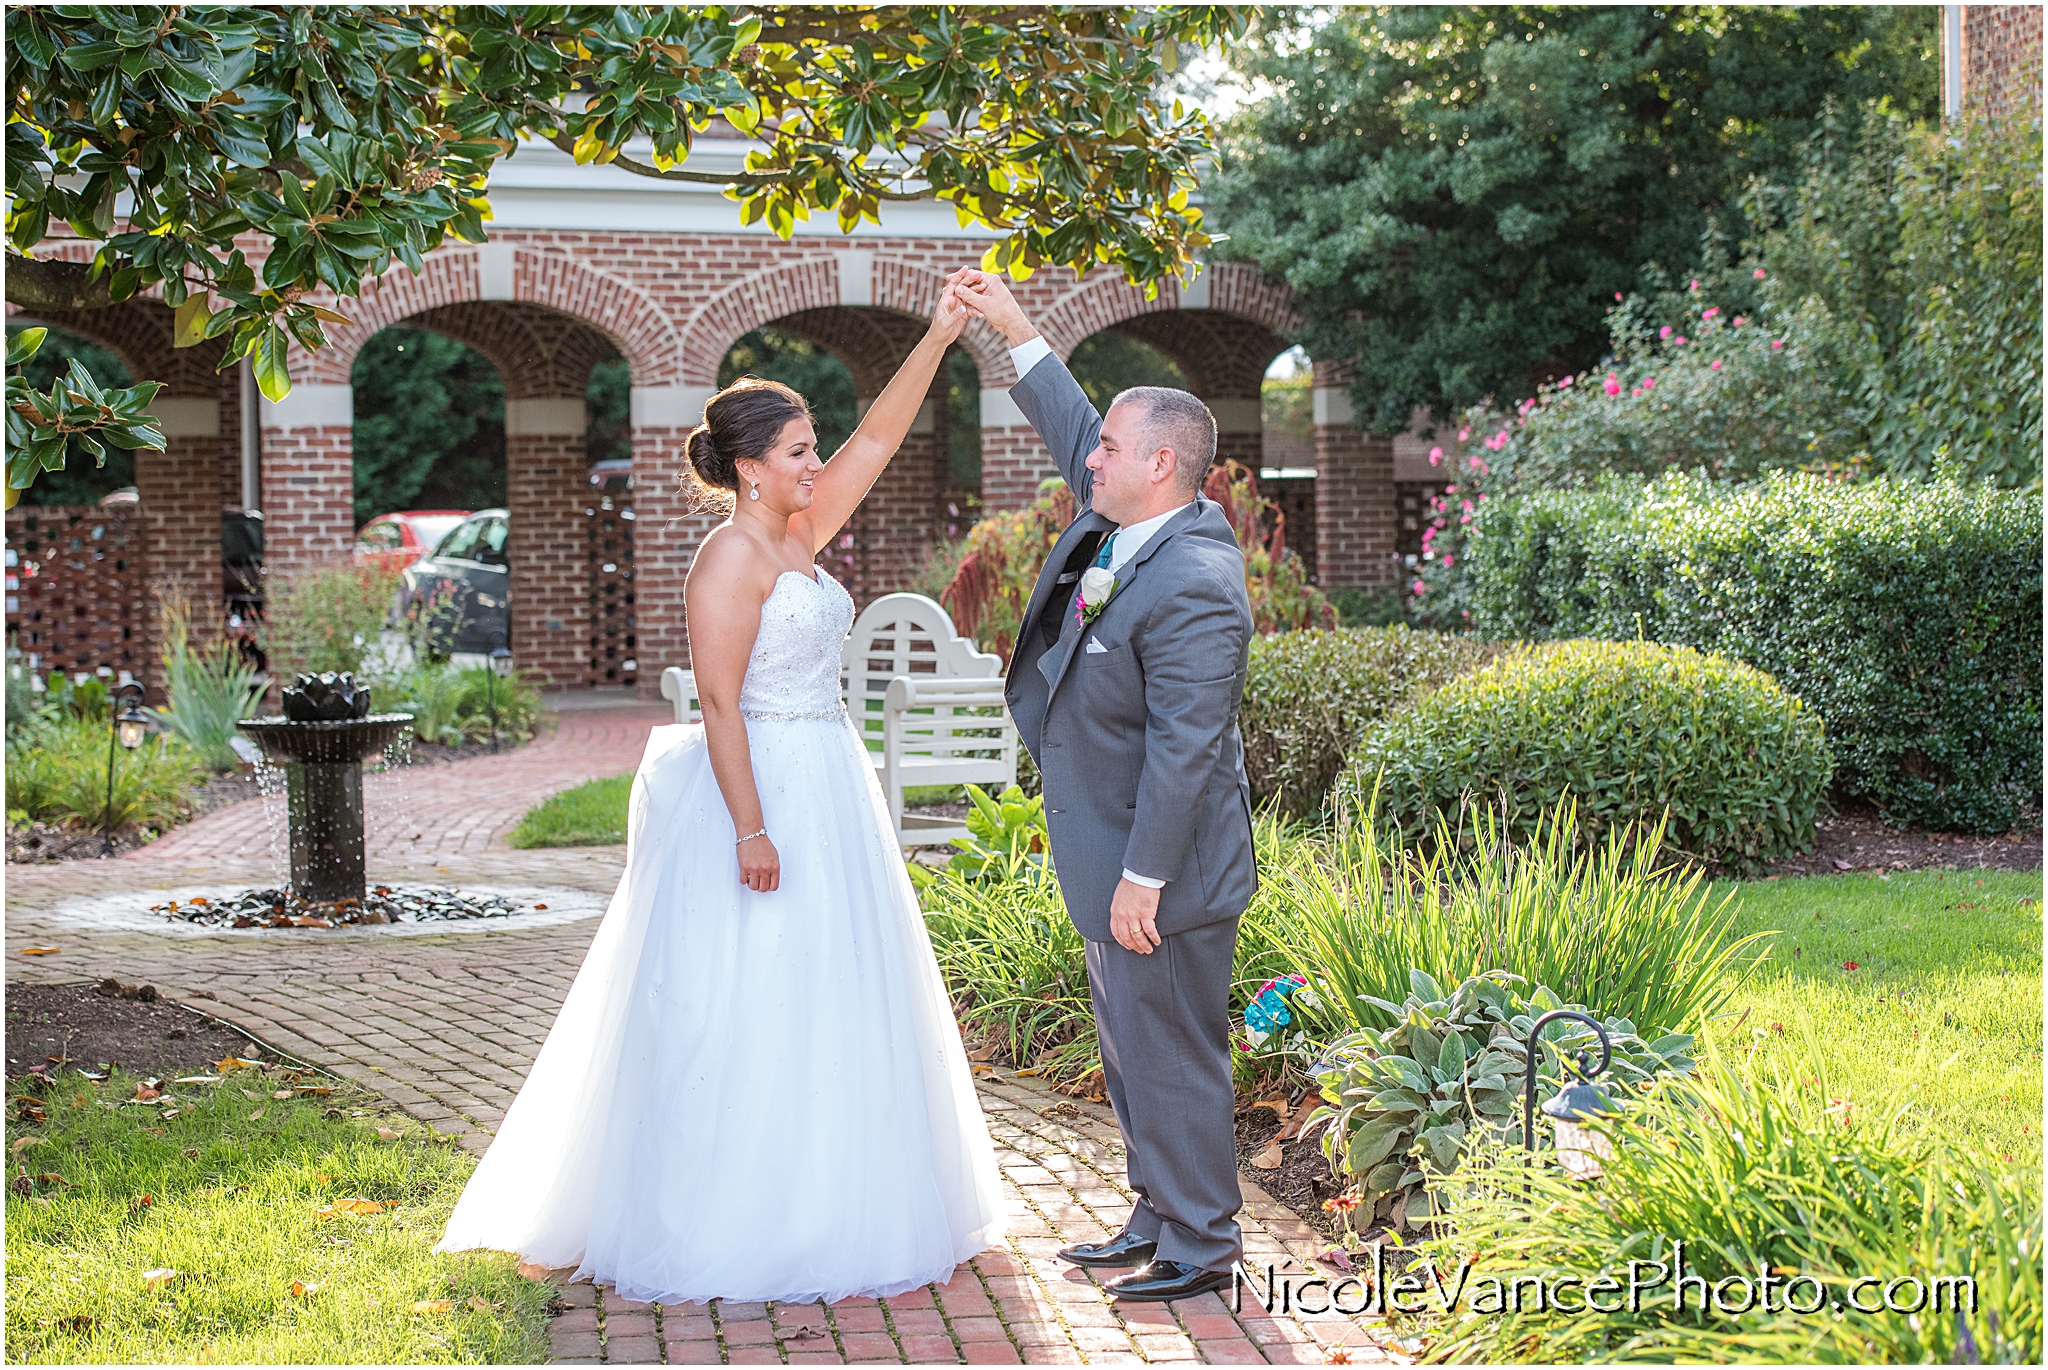 Wedding portraits at the gardens at Virginia Crossings.